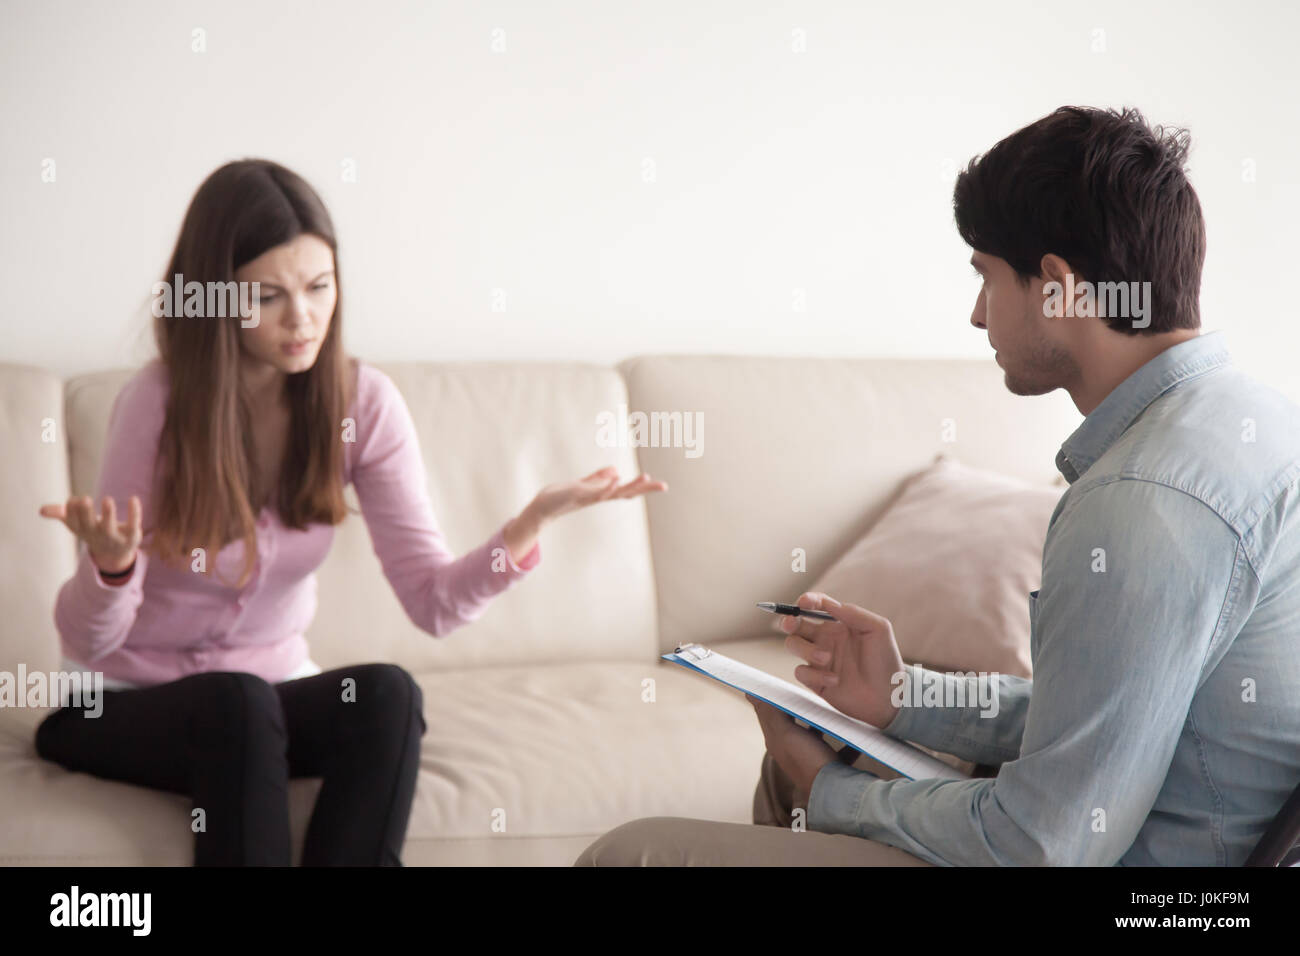 Conversation between male psychologist and young female patient, Stock Photo